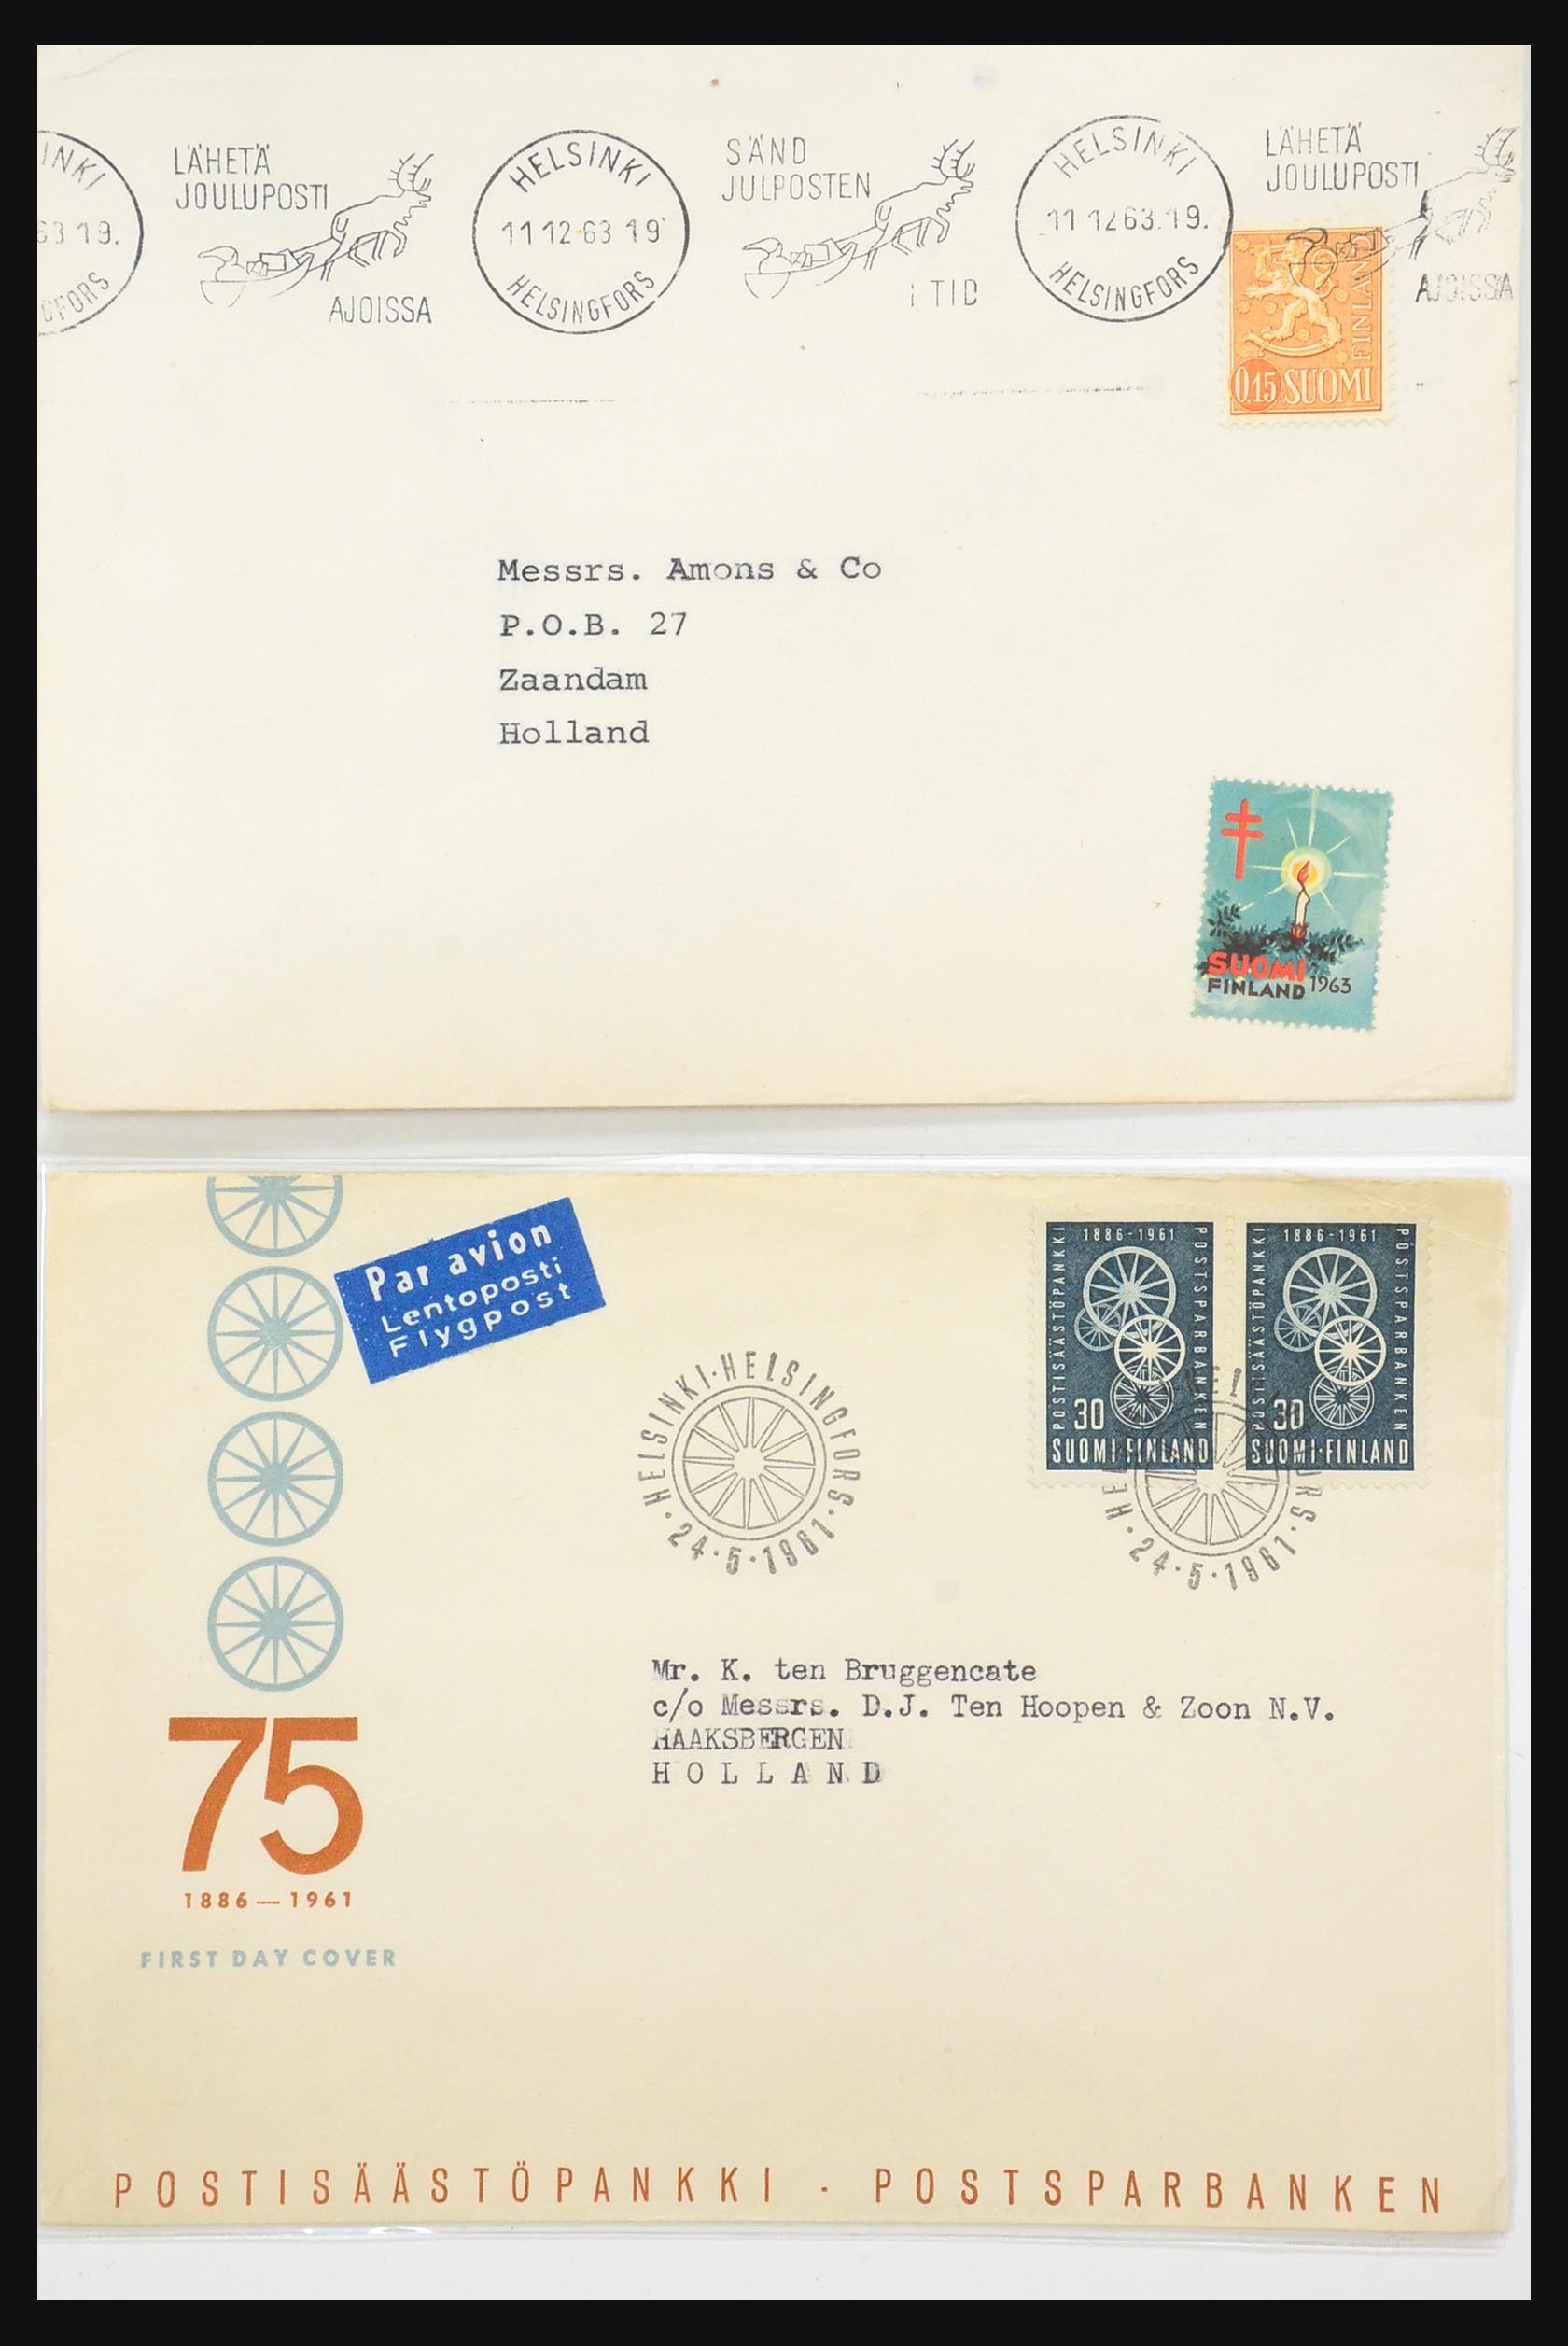 31363 060 - 31363 Finland covers 1874-1974.